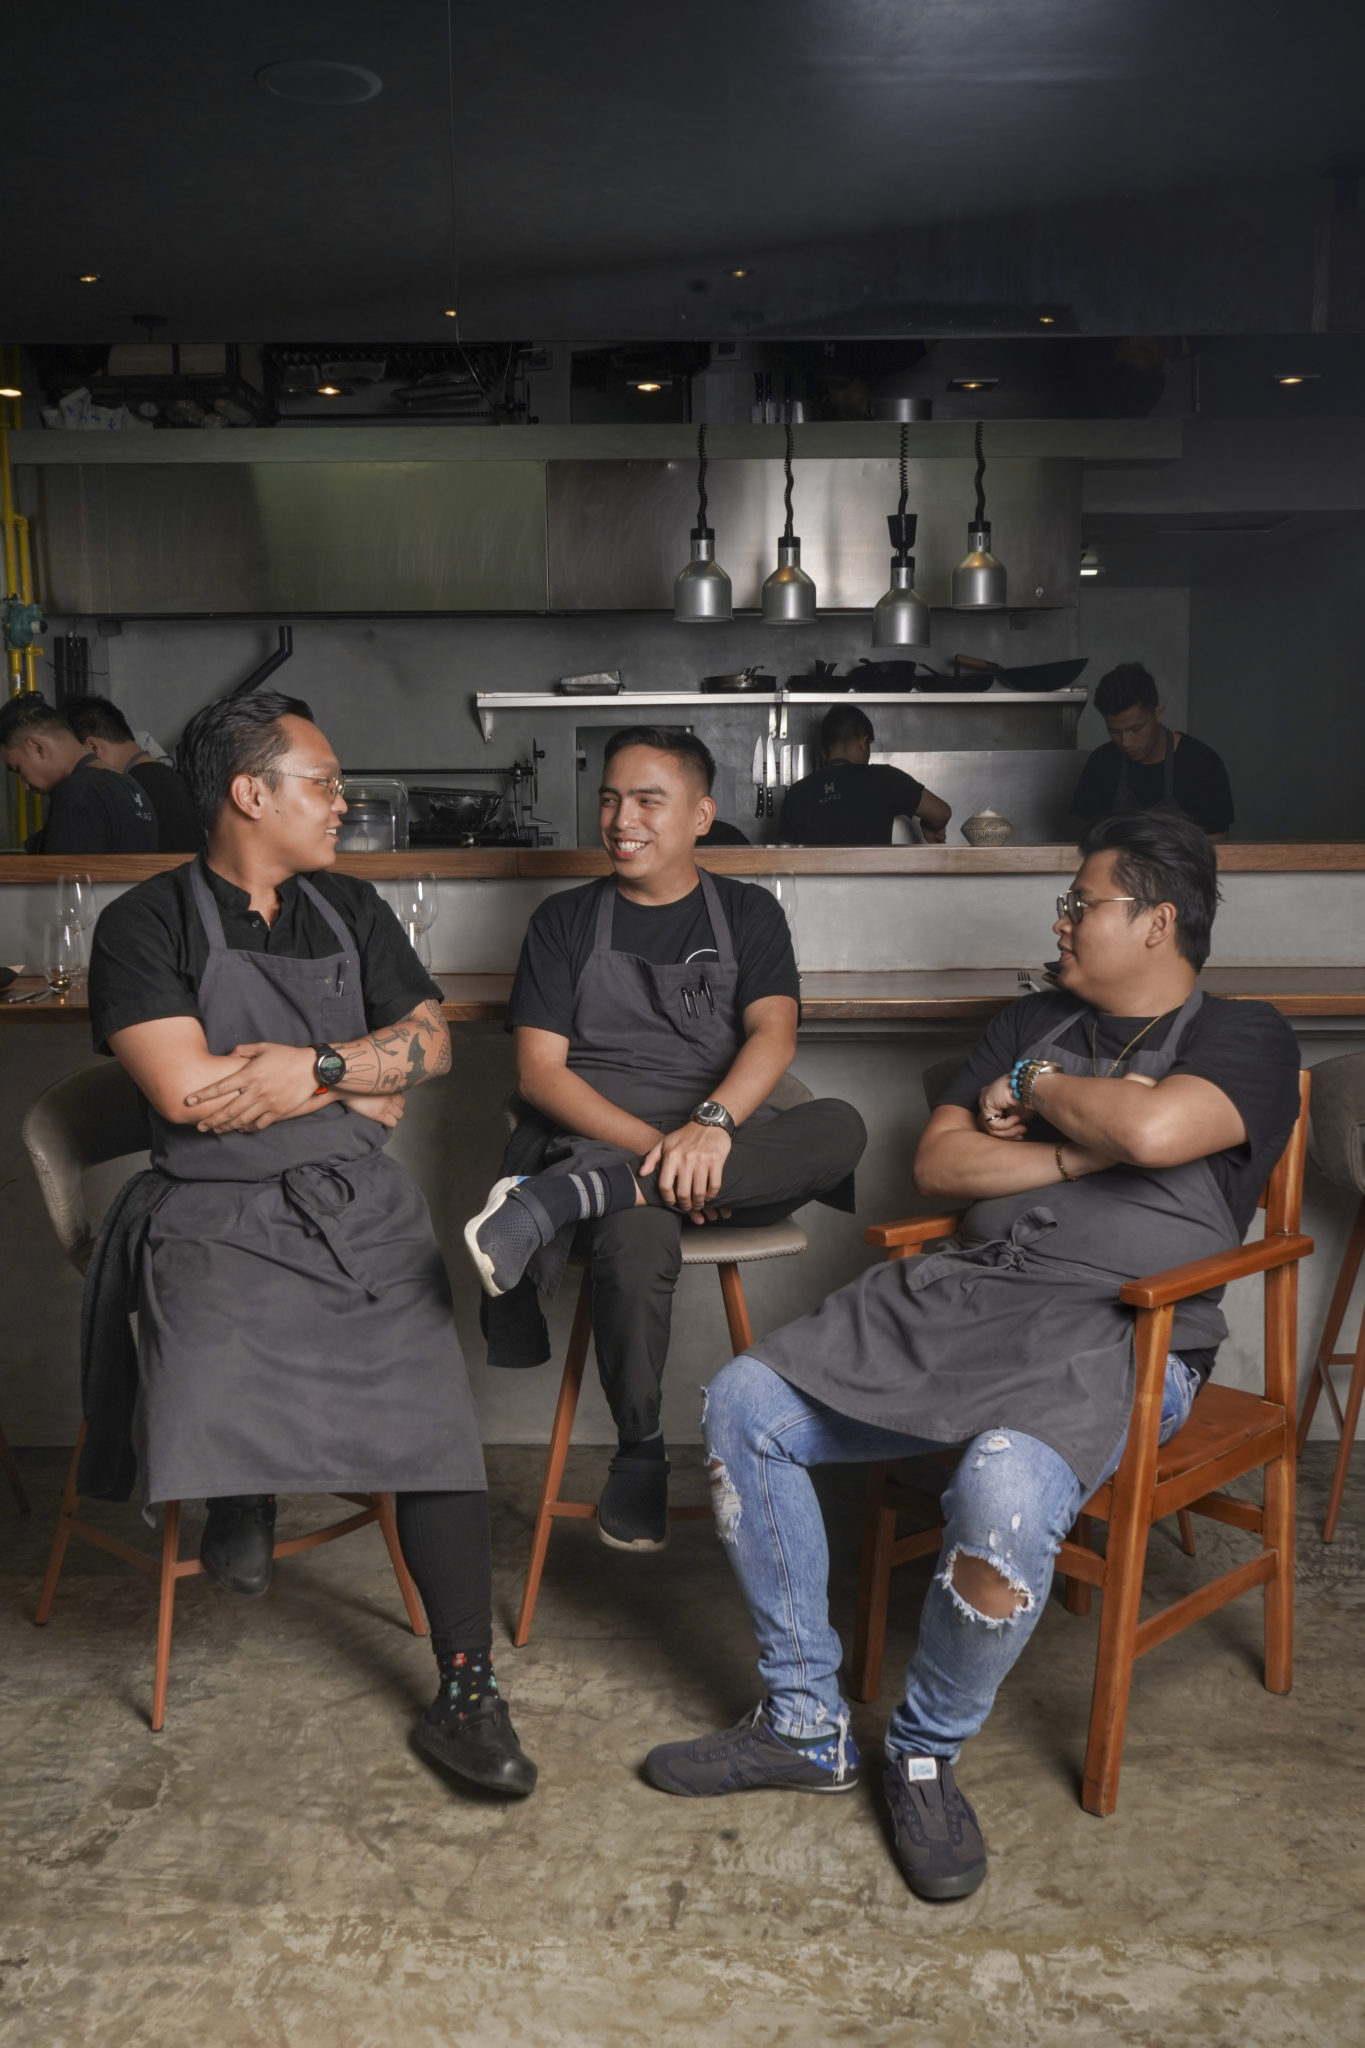 "It won't work if one person is missing... we're like a tripod," Kevin Navoa says about his work relationship with Hapag co-owners and chefs Kevin Villarica and Thirdy Dolatre